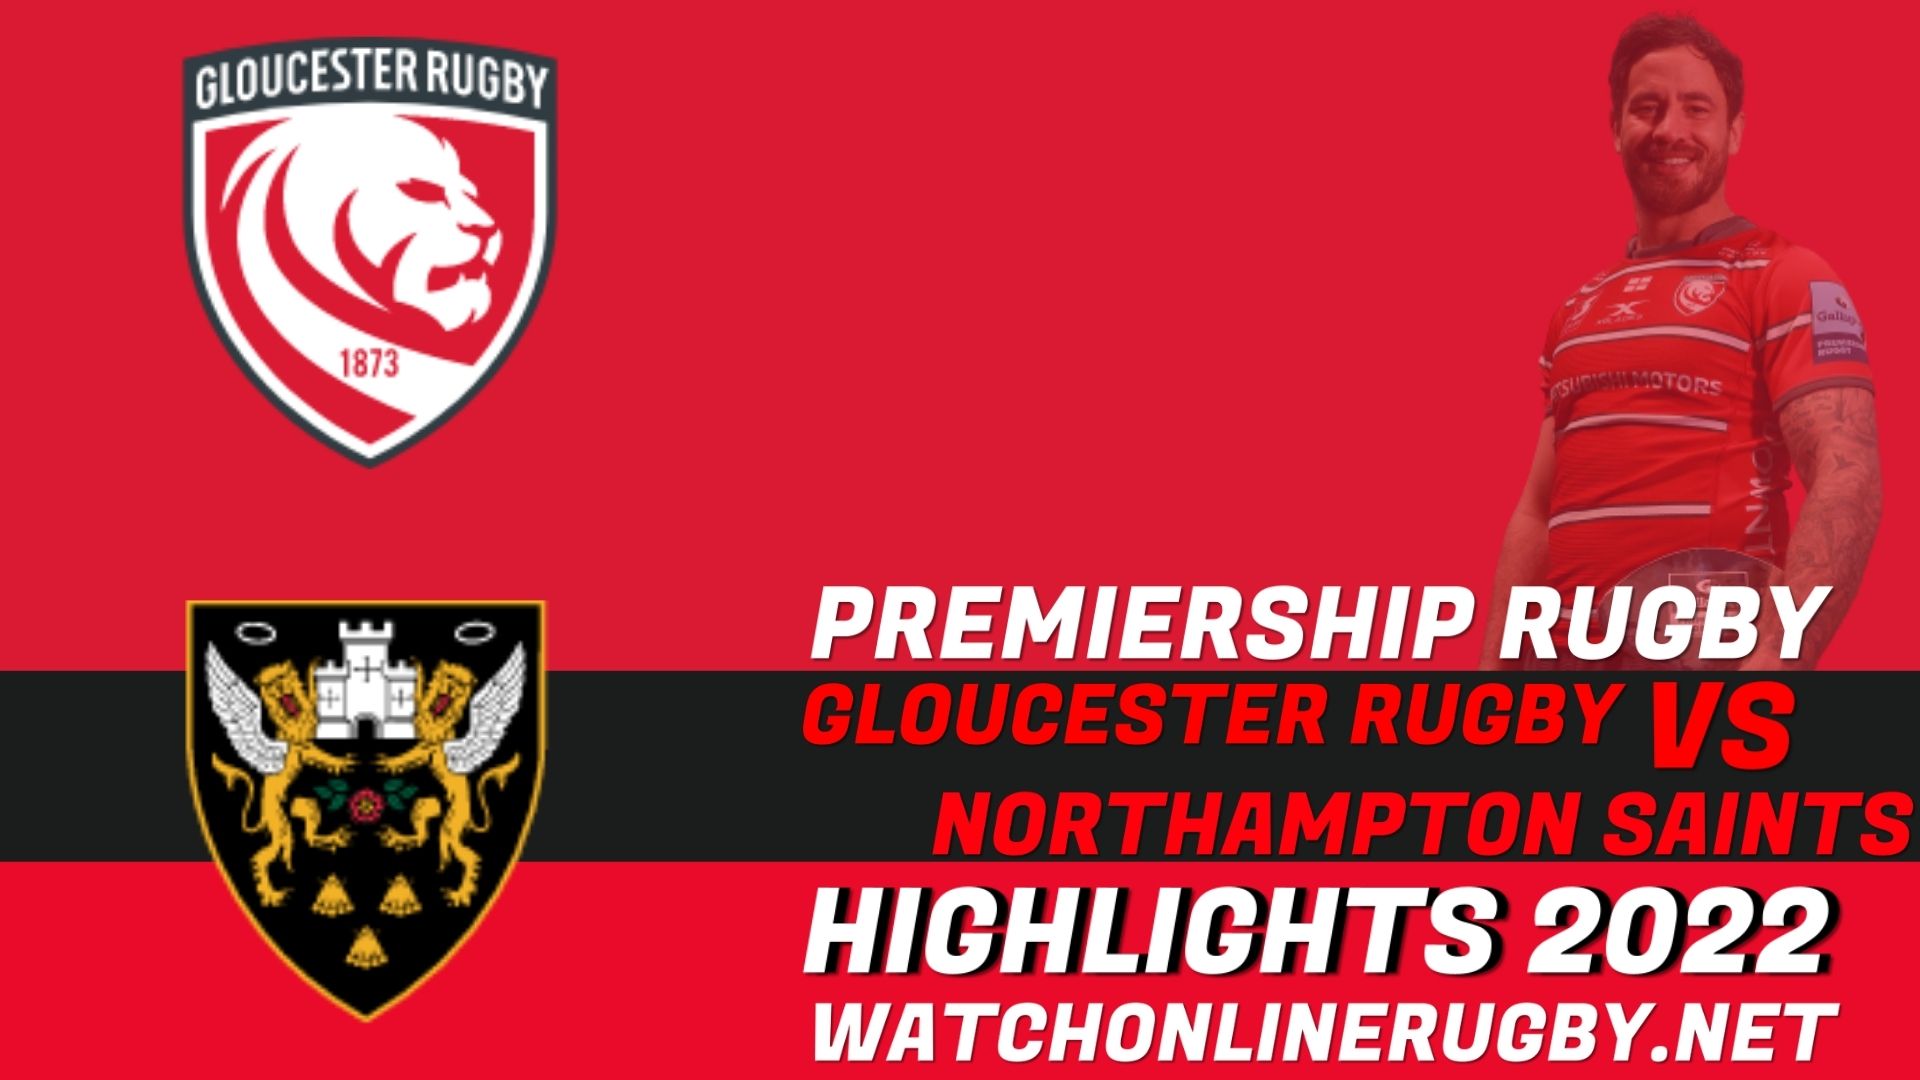 Gloucester Rugby Vs Northampton Saints Premiership Rugby 2022 RD 19